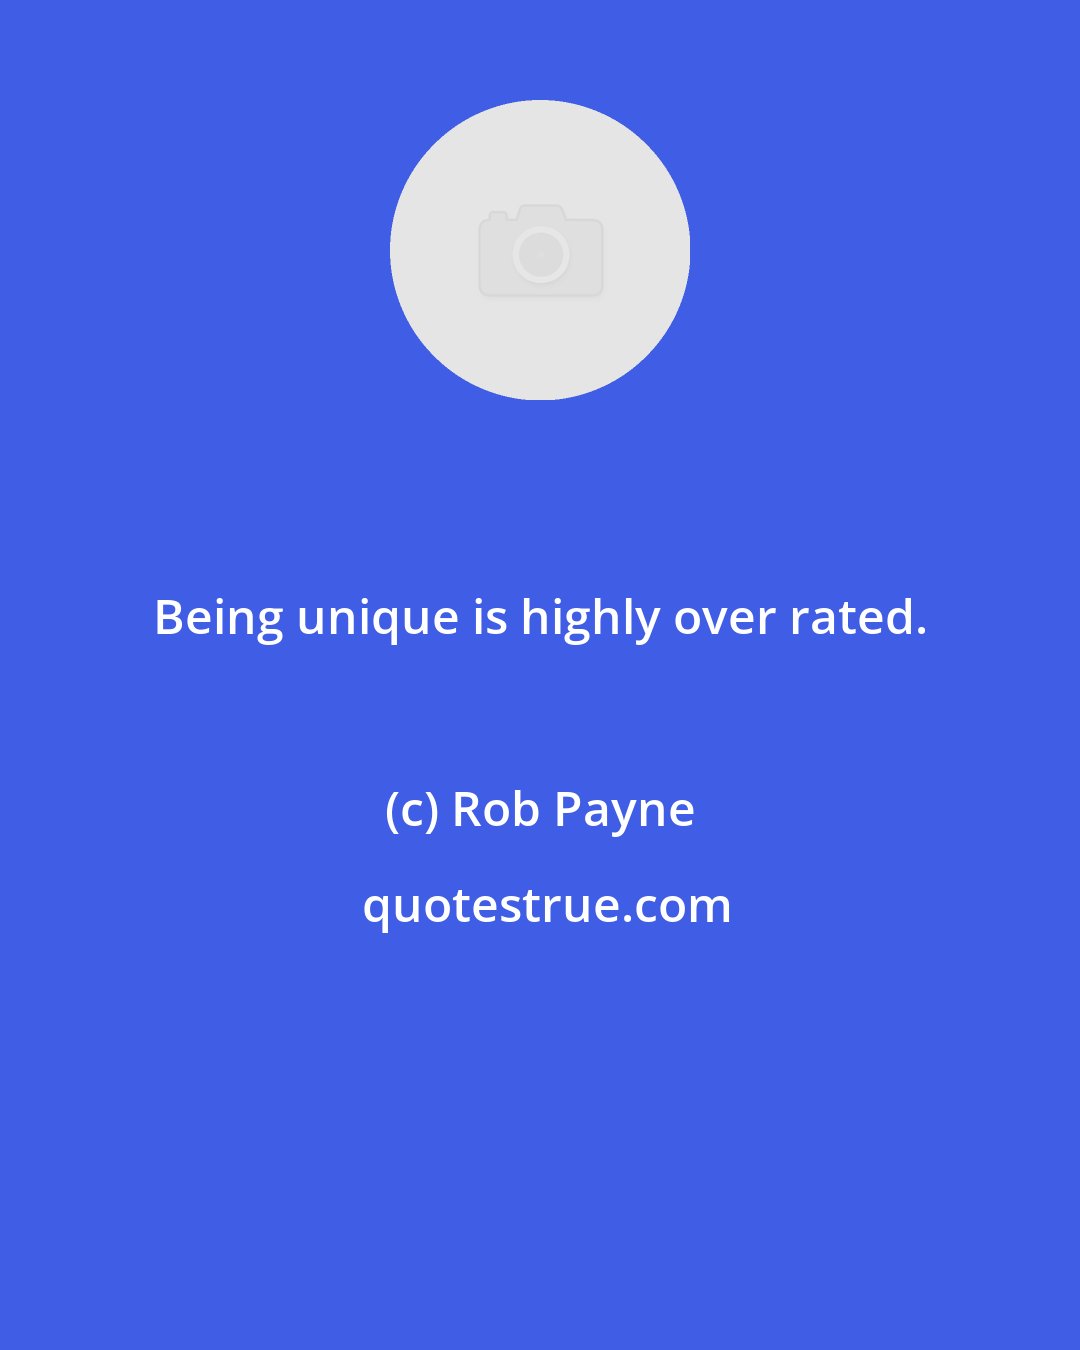 Rob Payne: Being unique is highly over rated.